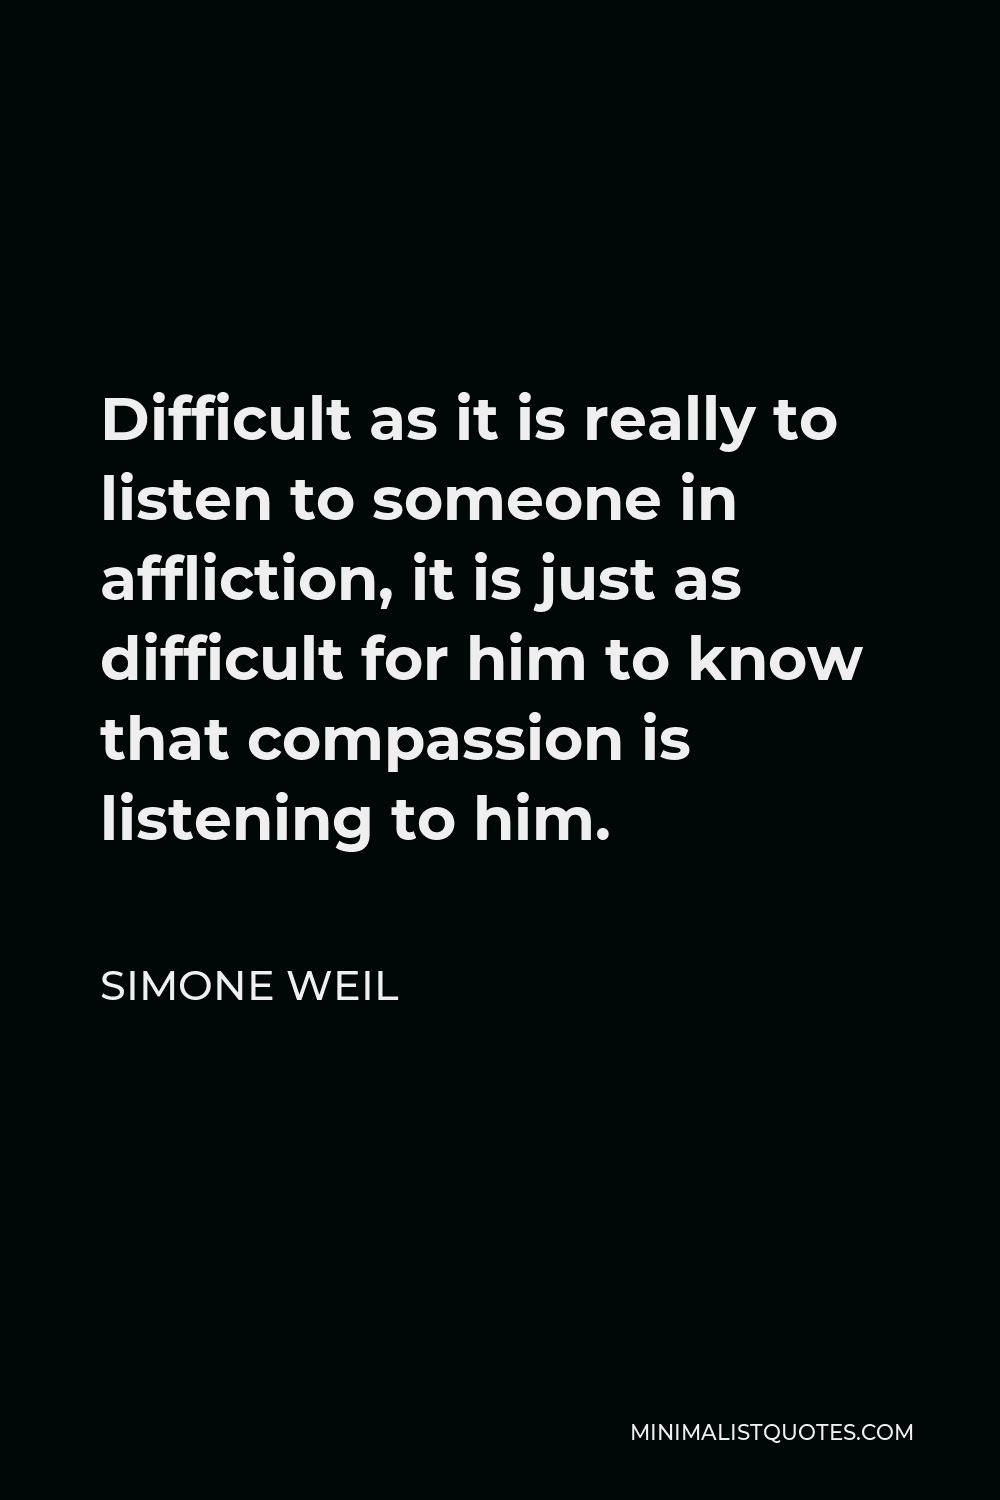 Simone Weil Quote - Difficult as it is really to listen to someone in affliction, it is just as difficult for him to know that compassion is listening to him.